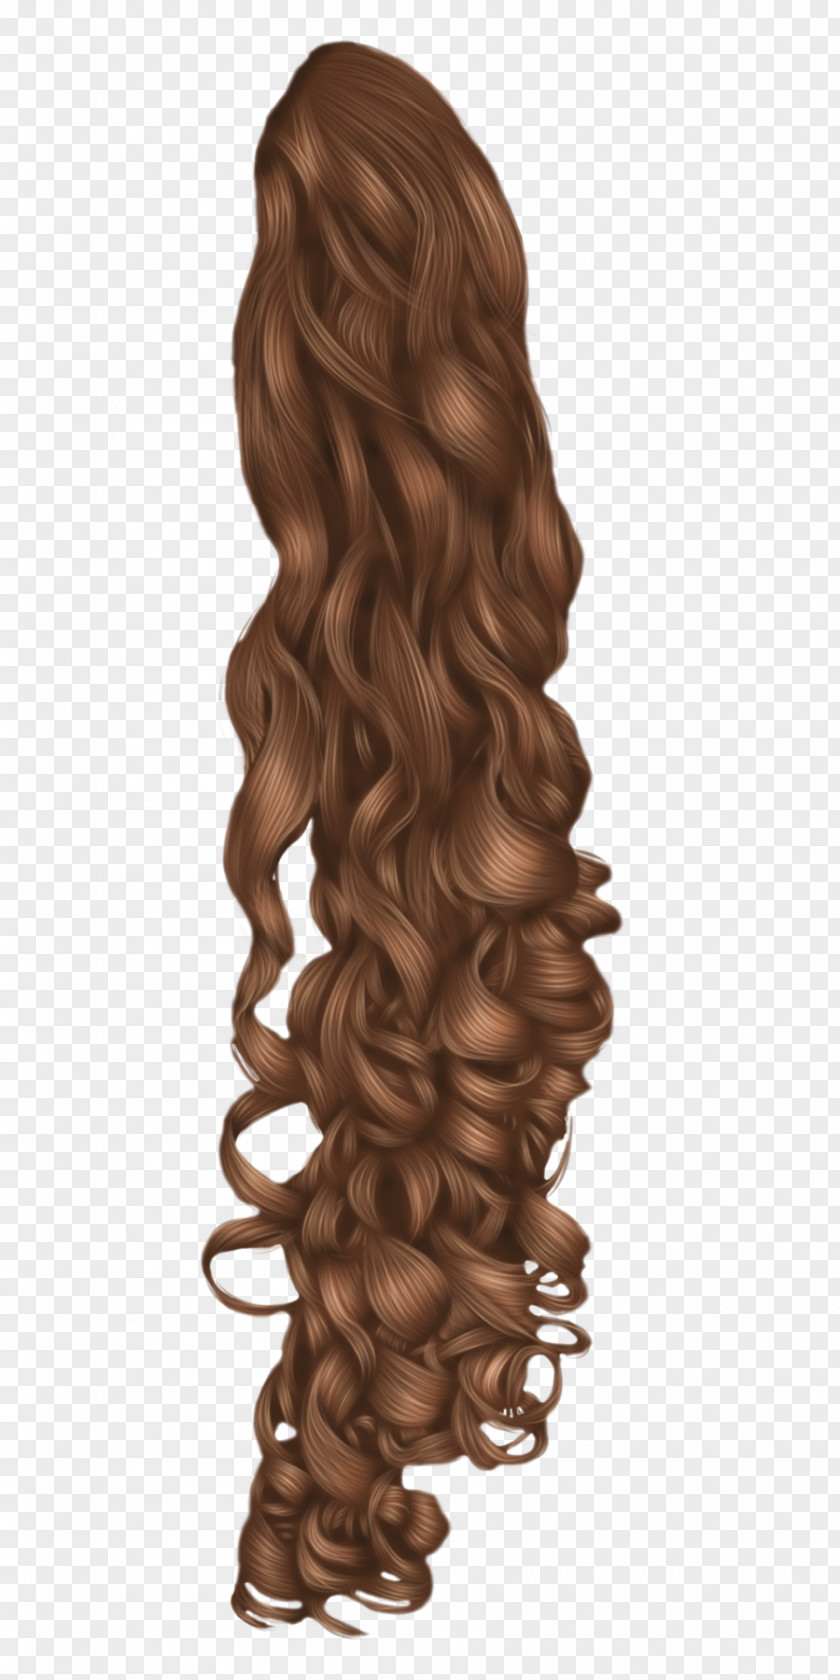 Curly Black Hair Wig Hairstyle PNG